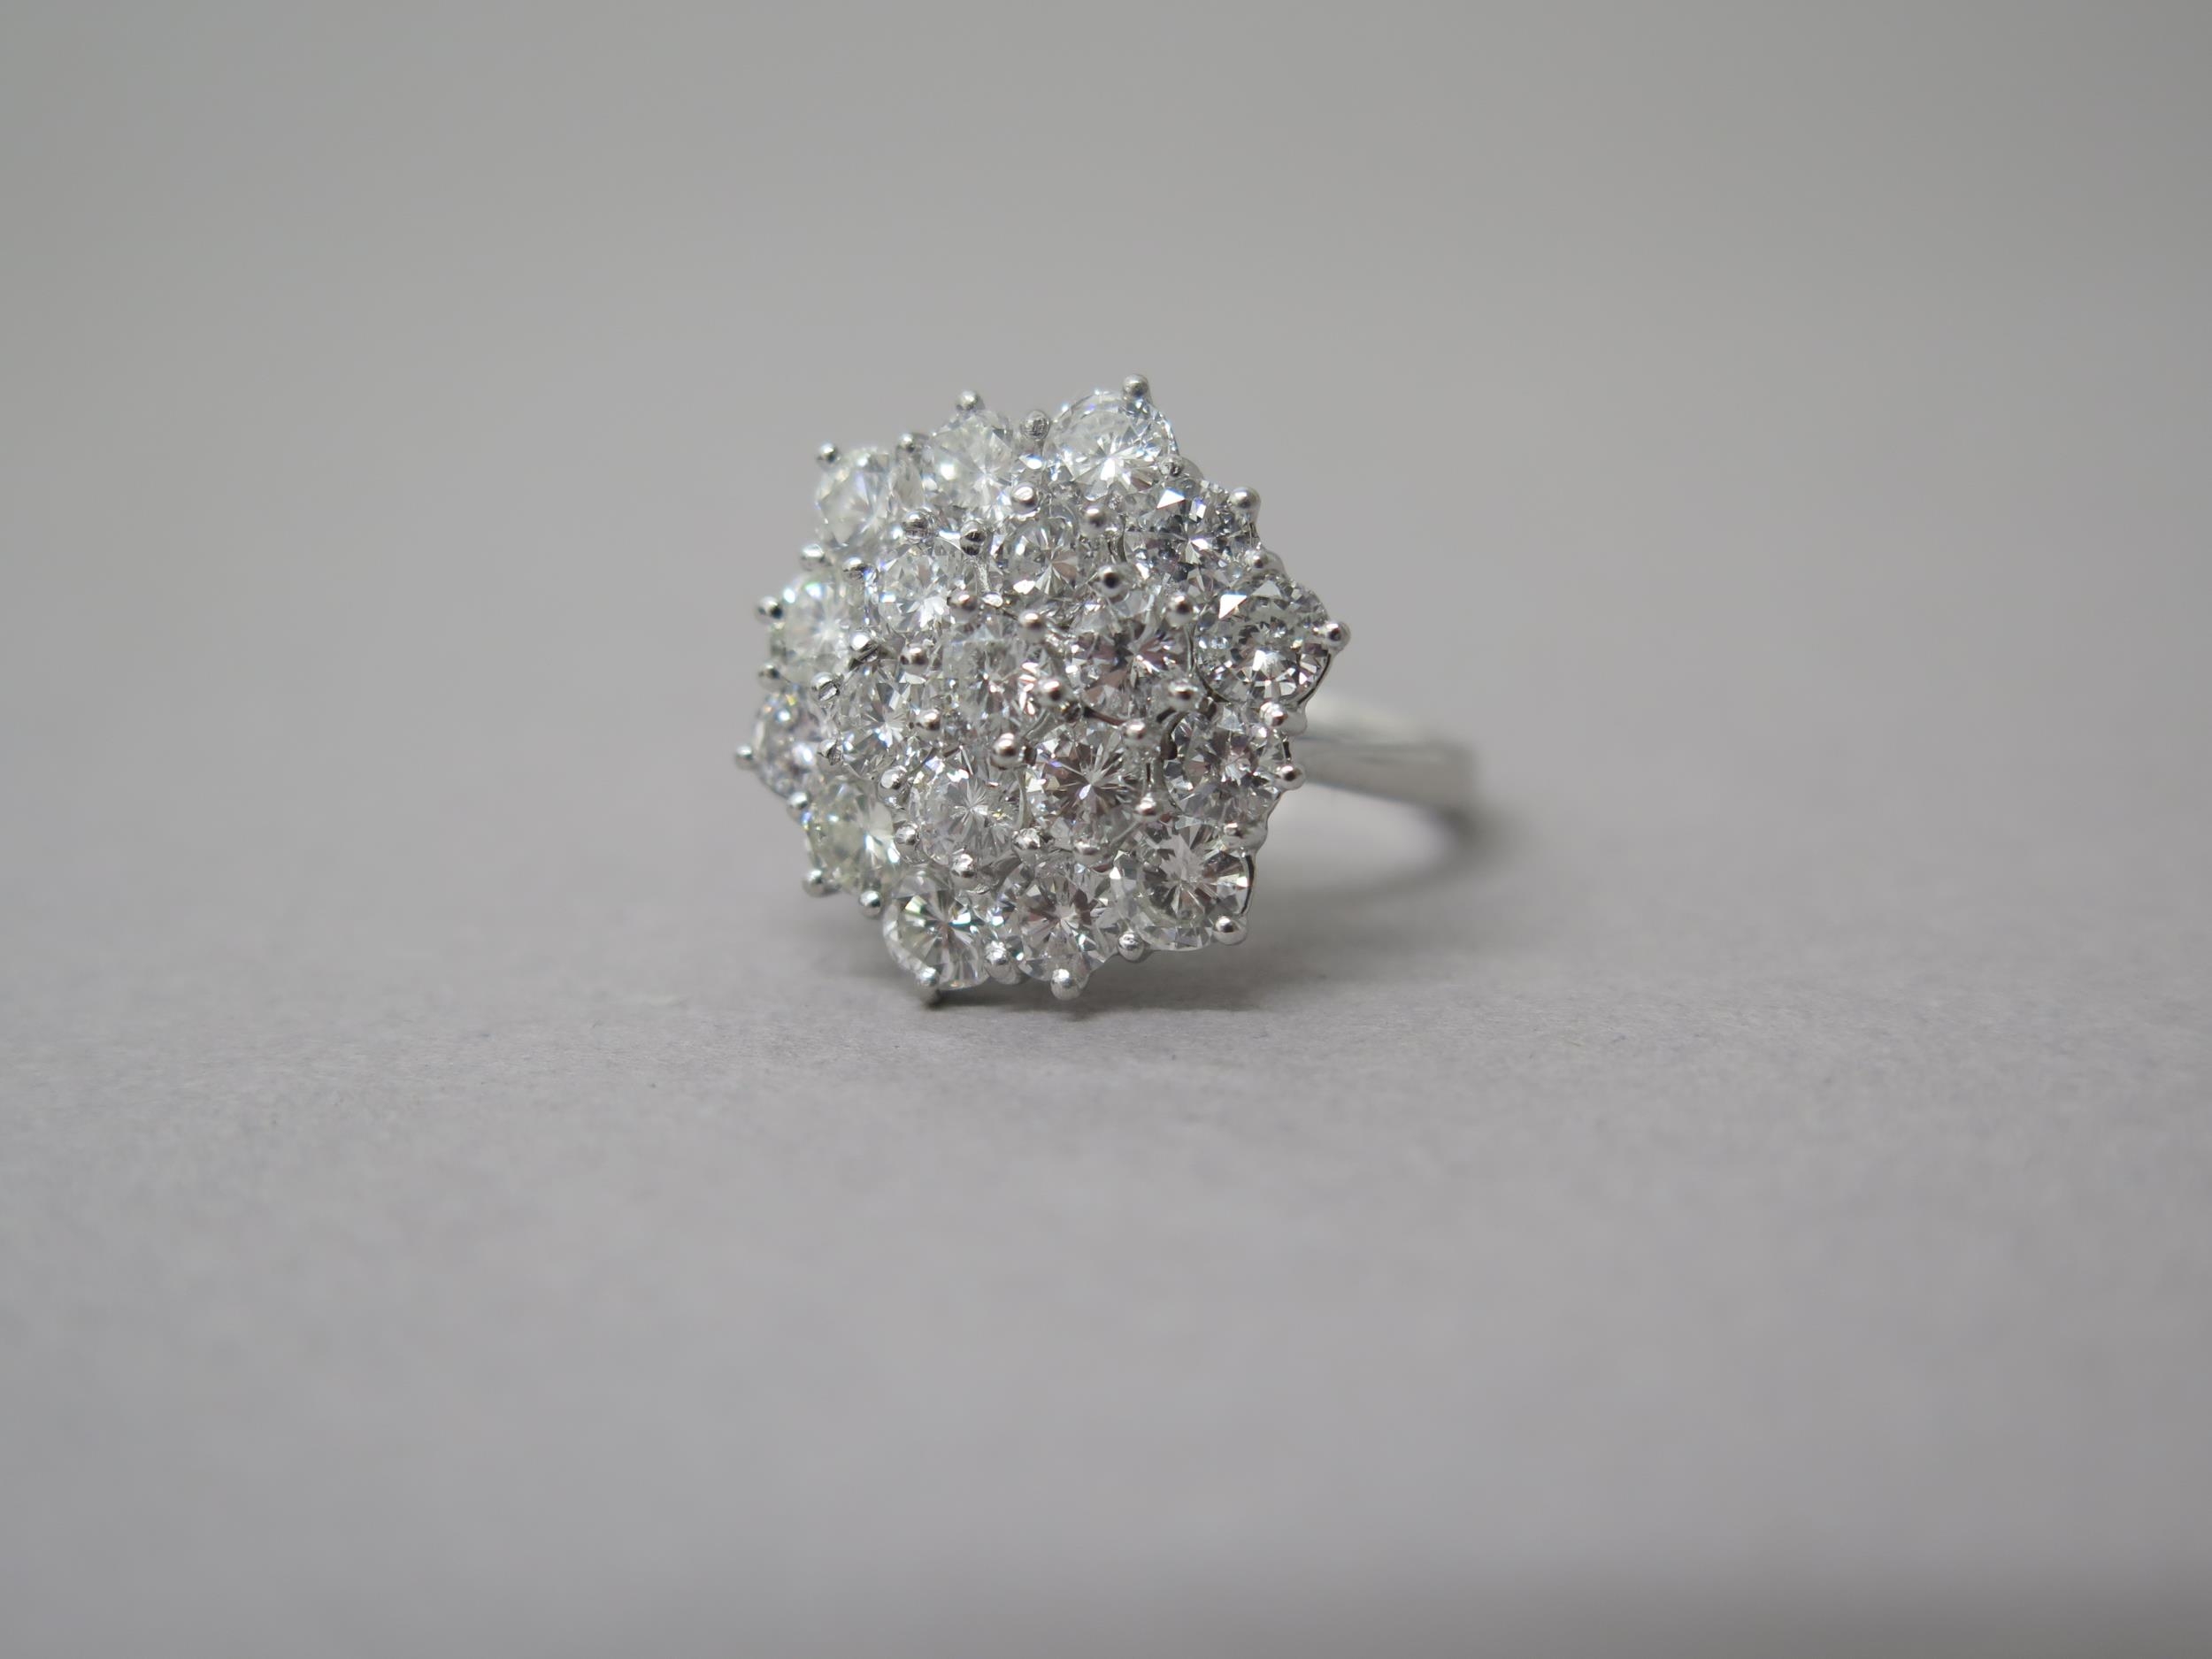 A good quality 18ct white gold large diamond cluster ring - diamonds approx 2ct, diamonds are well